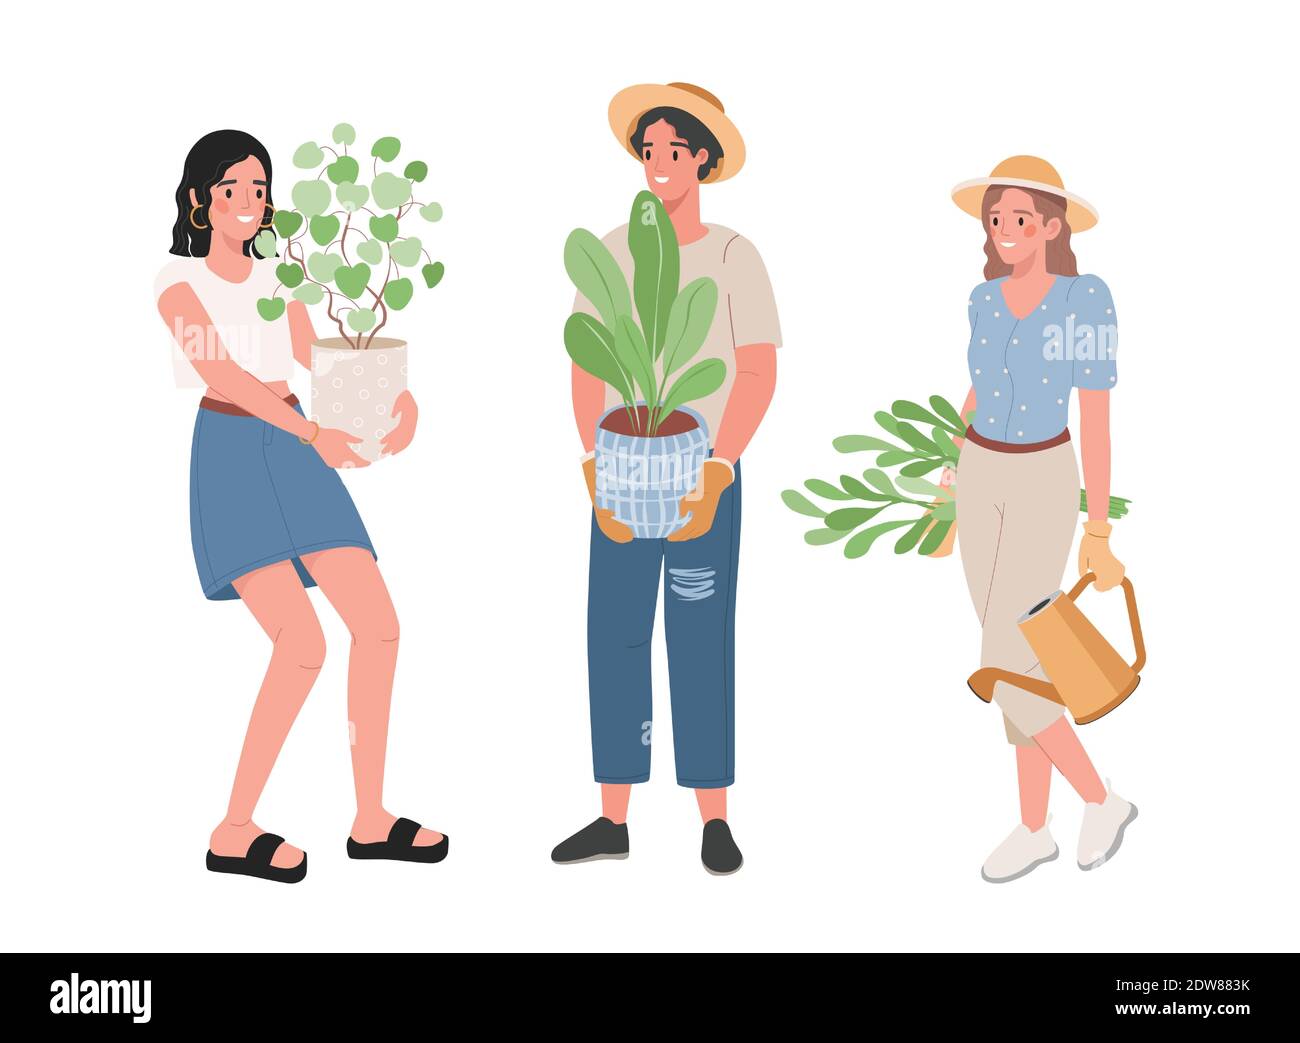 Set of happy smiling people holding pots with green plants vector flat illustration isolated on white background. Man and women with home plants and watering can. Gardening hobby concept. Stock Vector